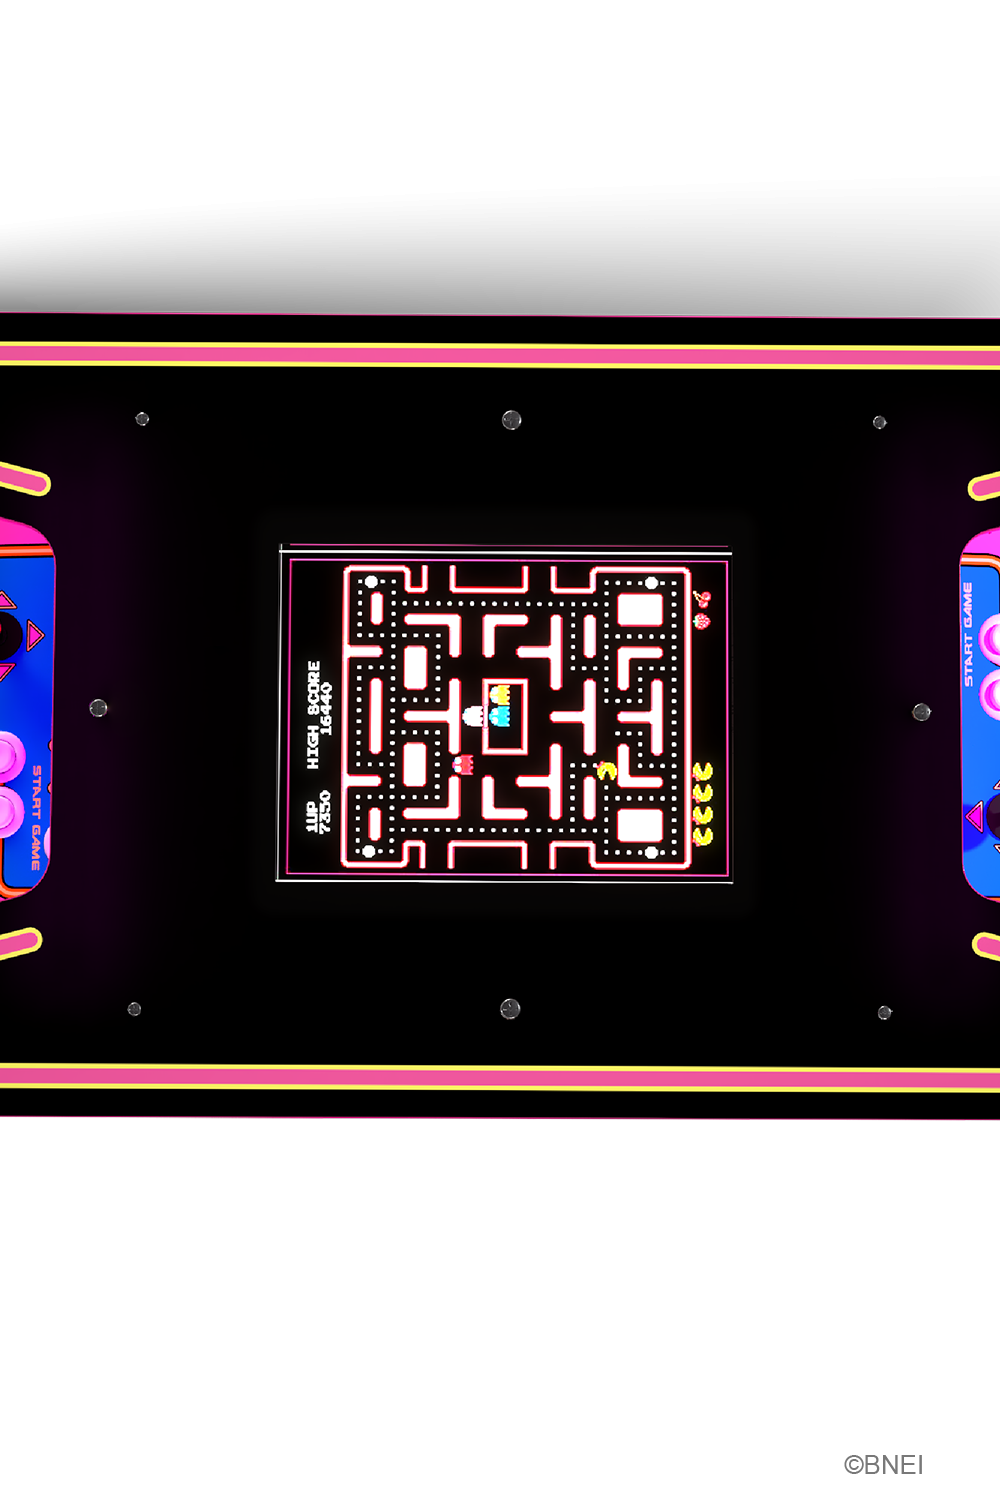 ARCADE 1 UP MS. PAC-MAN HEAD-TO-HEAD TABLE